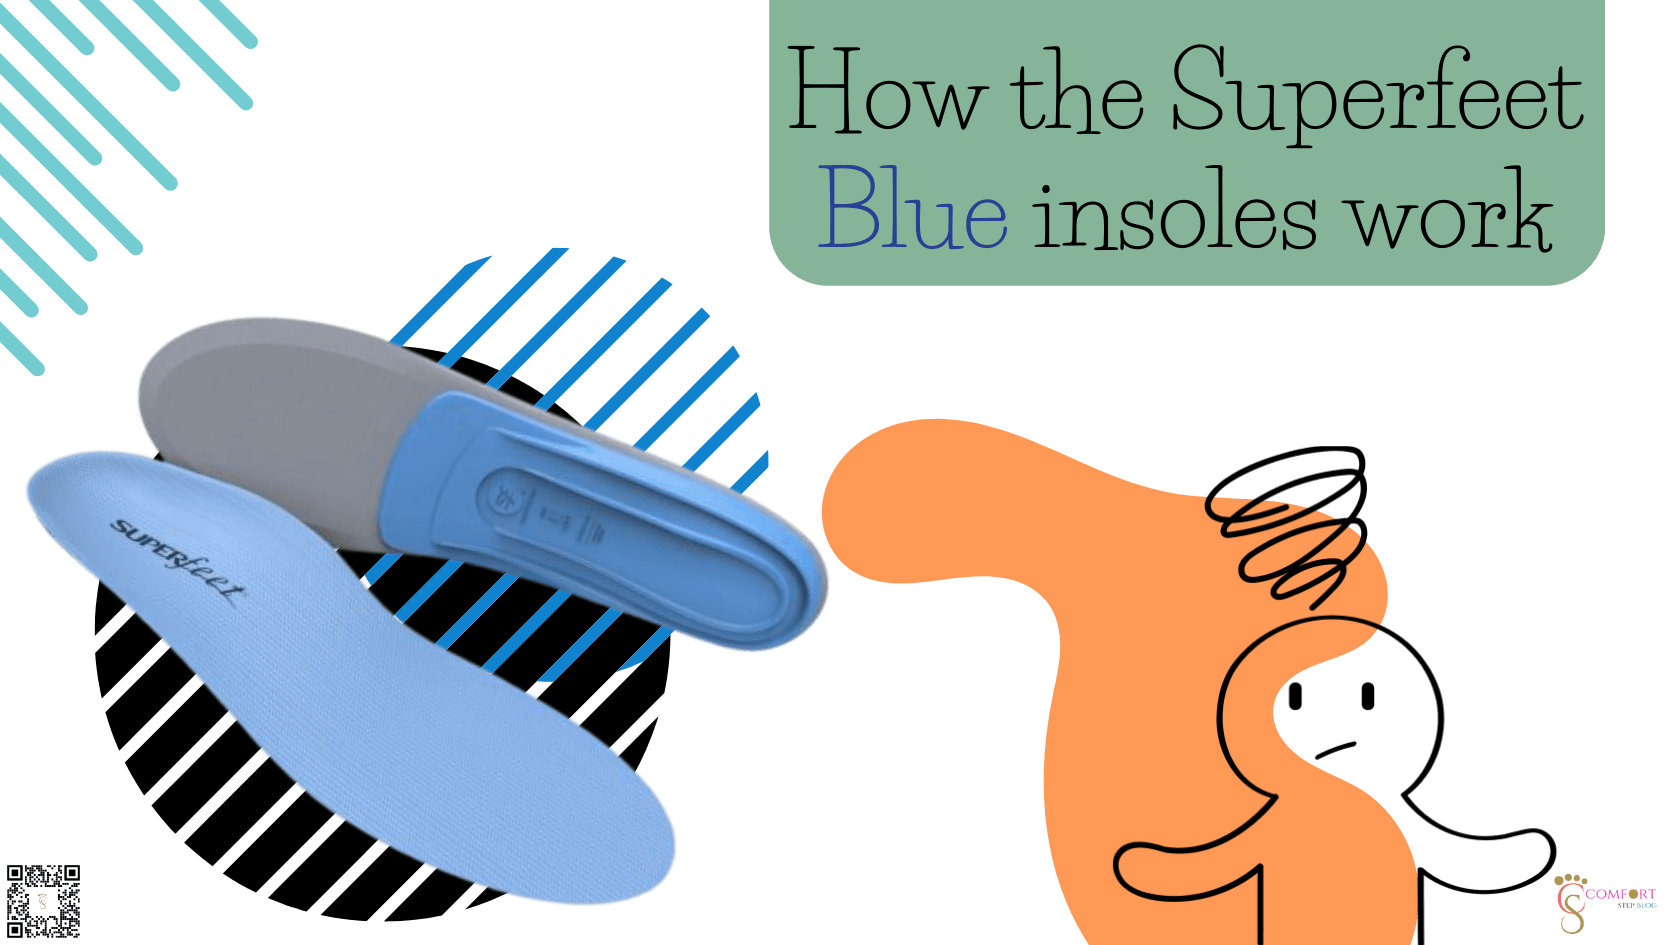 How the Superfeet Blue insoles work